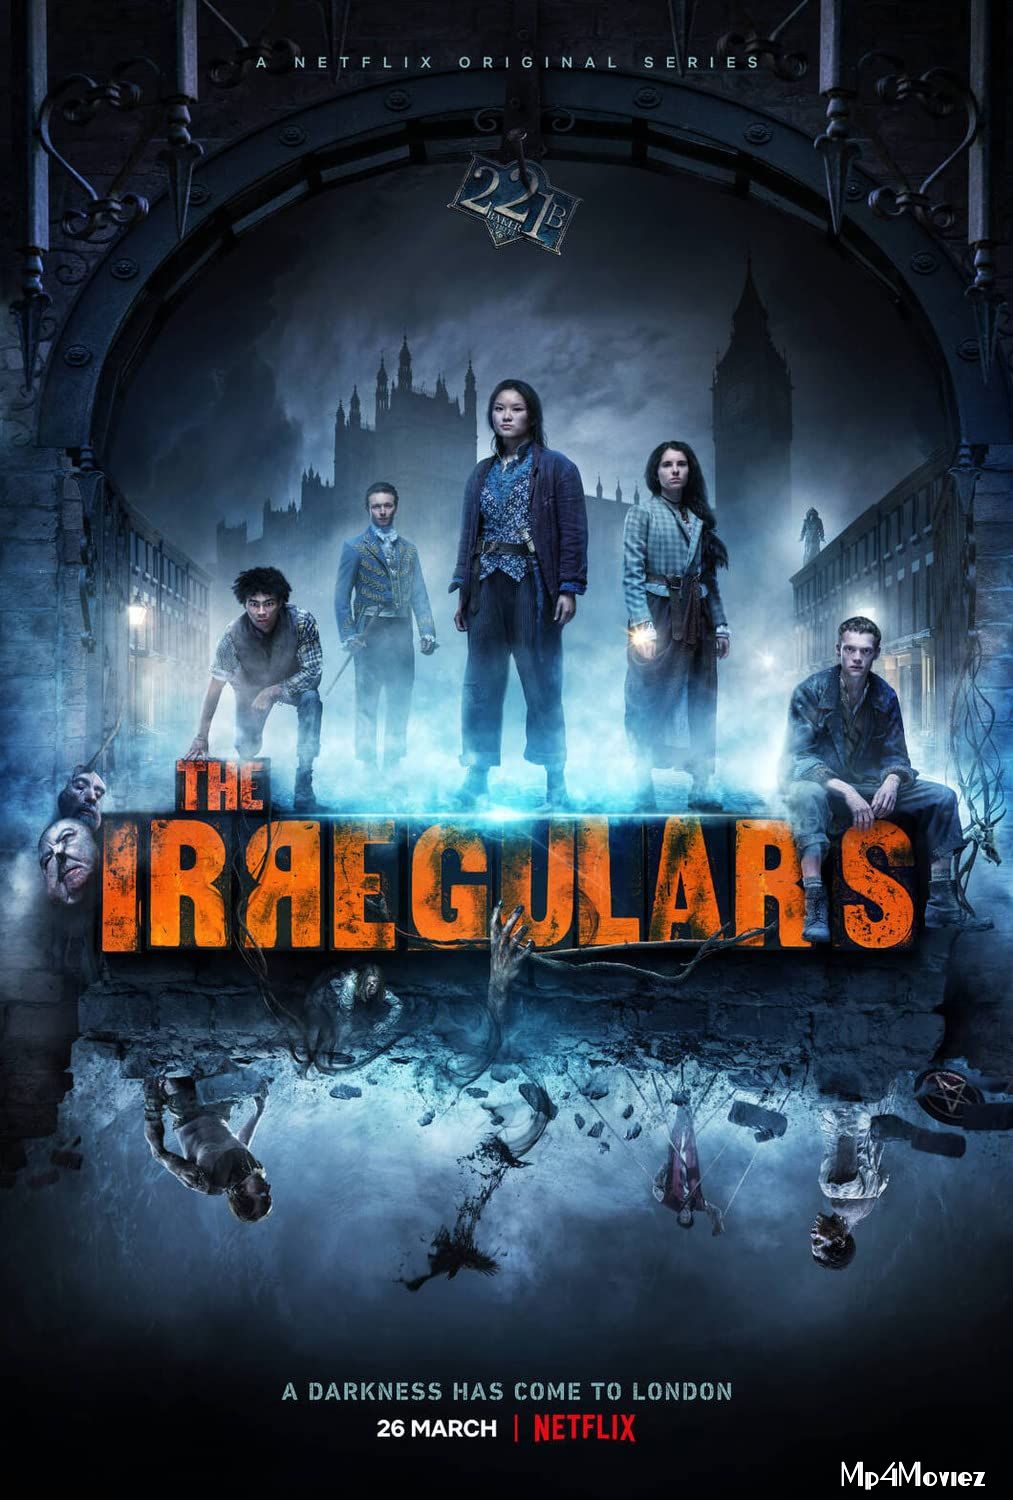 The Irregulars (2021) S01 Complete (Episode 1 to 4) NF Series HDRip download full movie